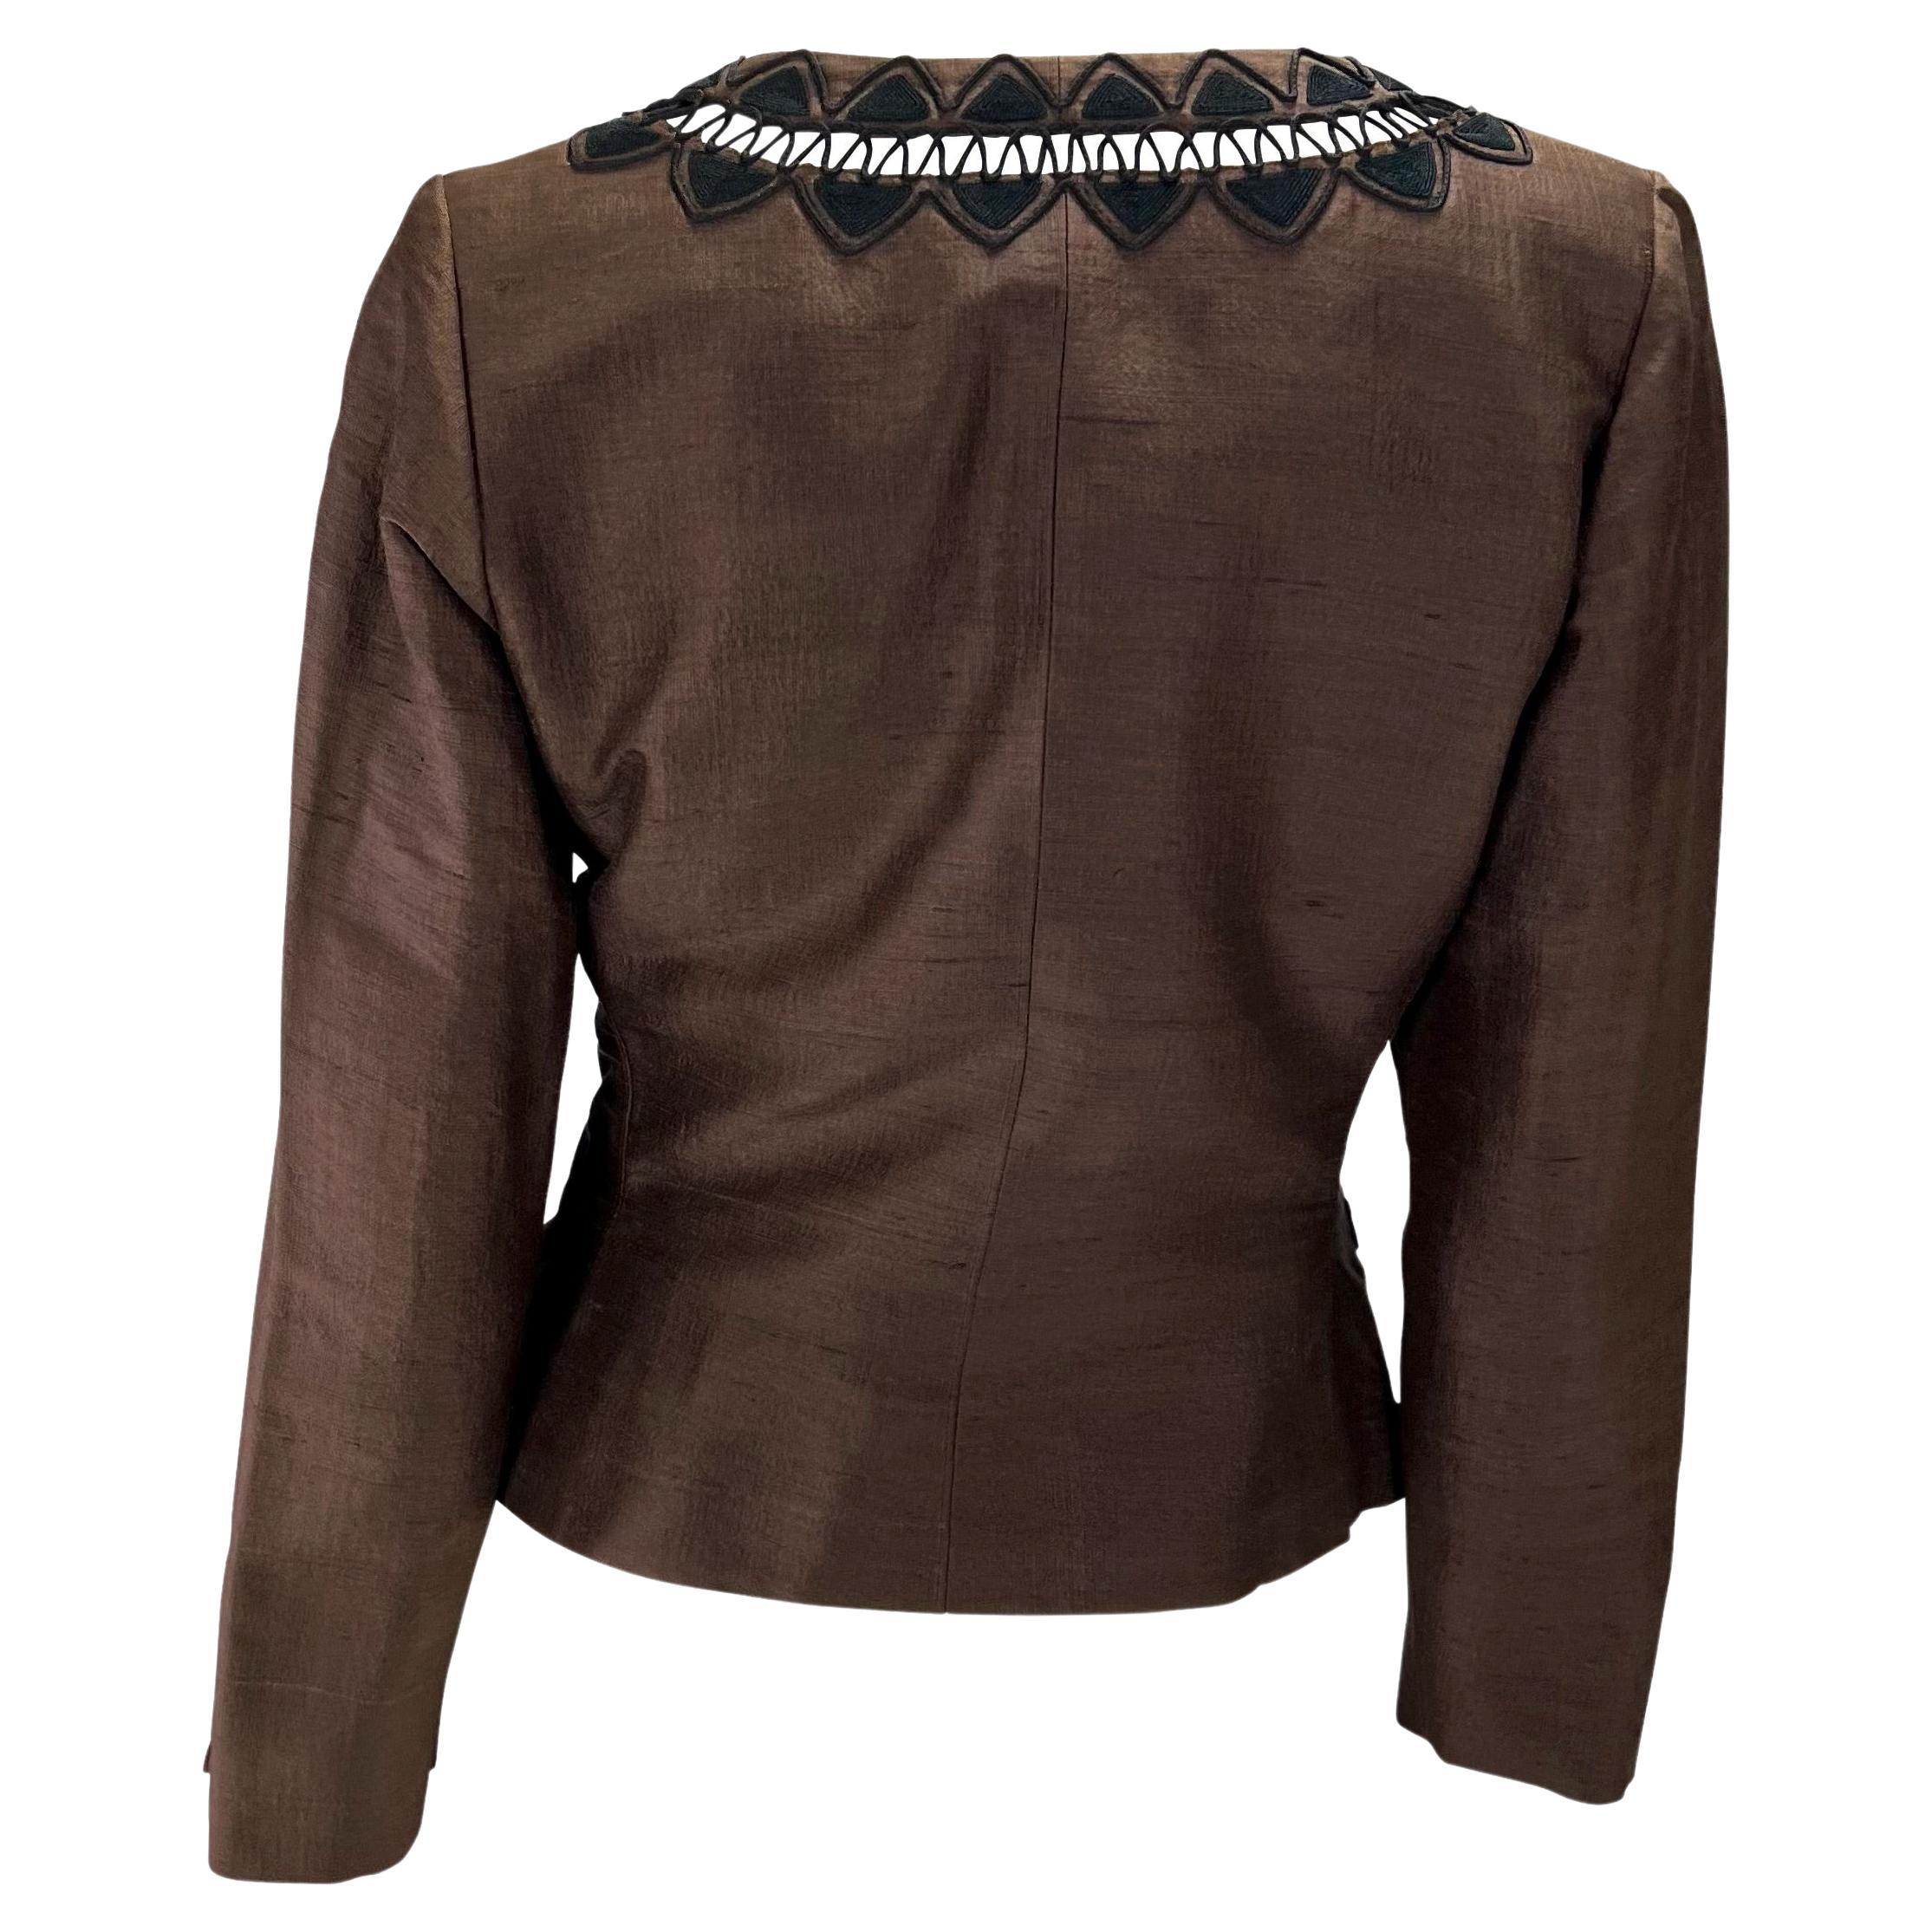 Cruise 1995 Yves Saint Laurent Rive Gauche Brown Silk Cropped Jacket In Good Condition For Sale In West Hollywood, CA